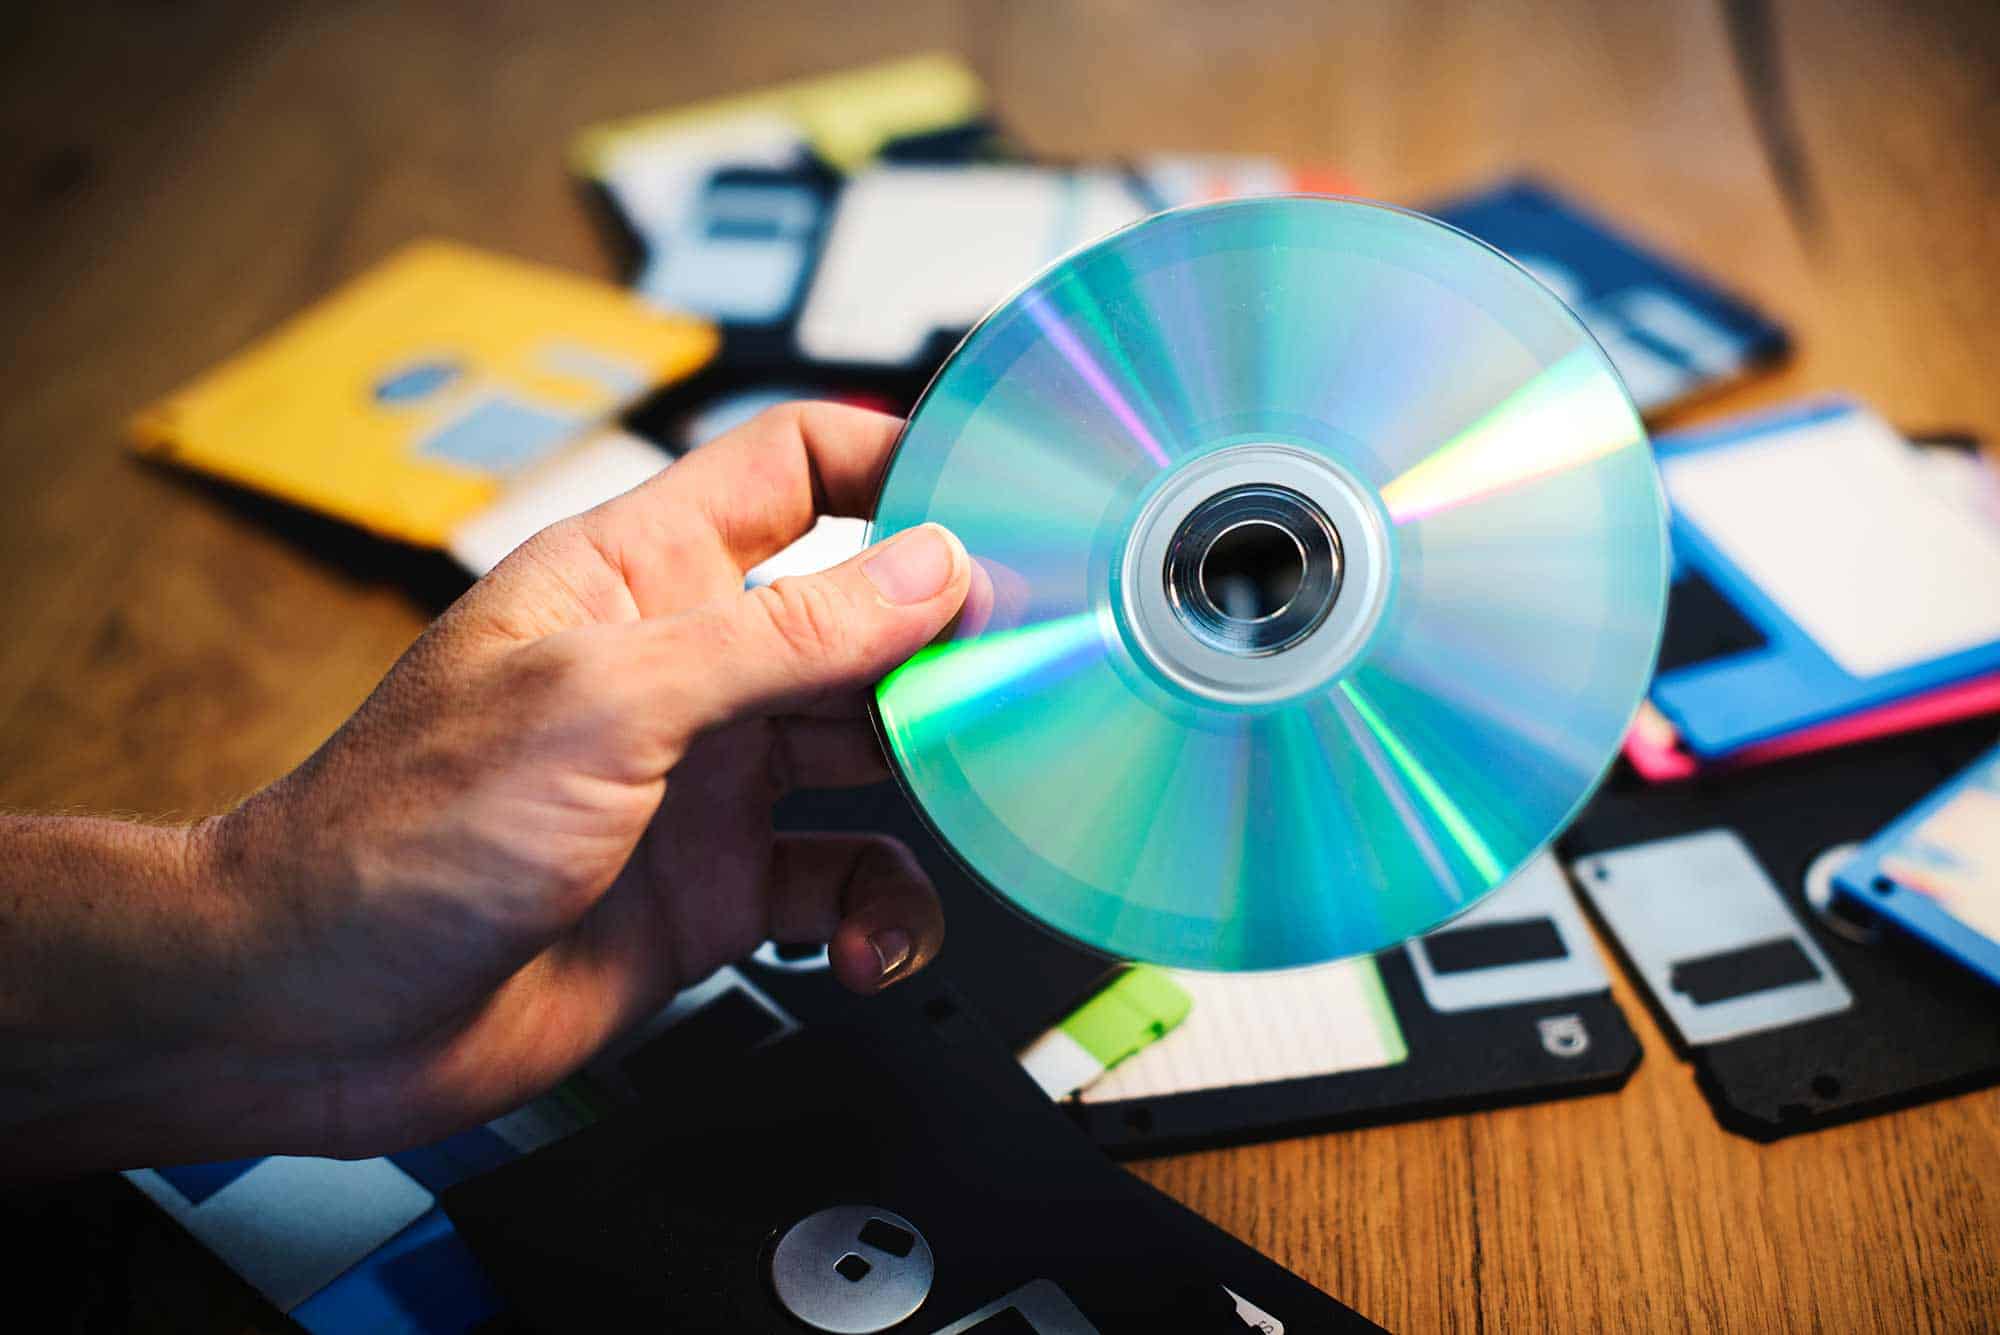 Disc, definition of compact disc, definition of CD, types of CD, what is compact  disc, what is CD